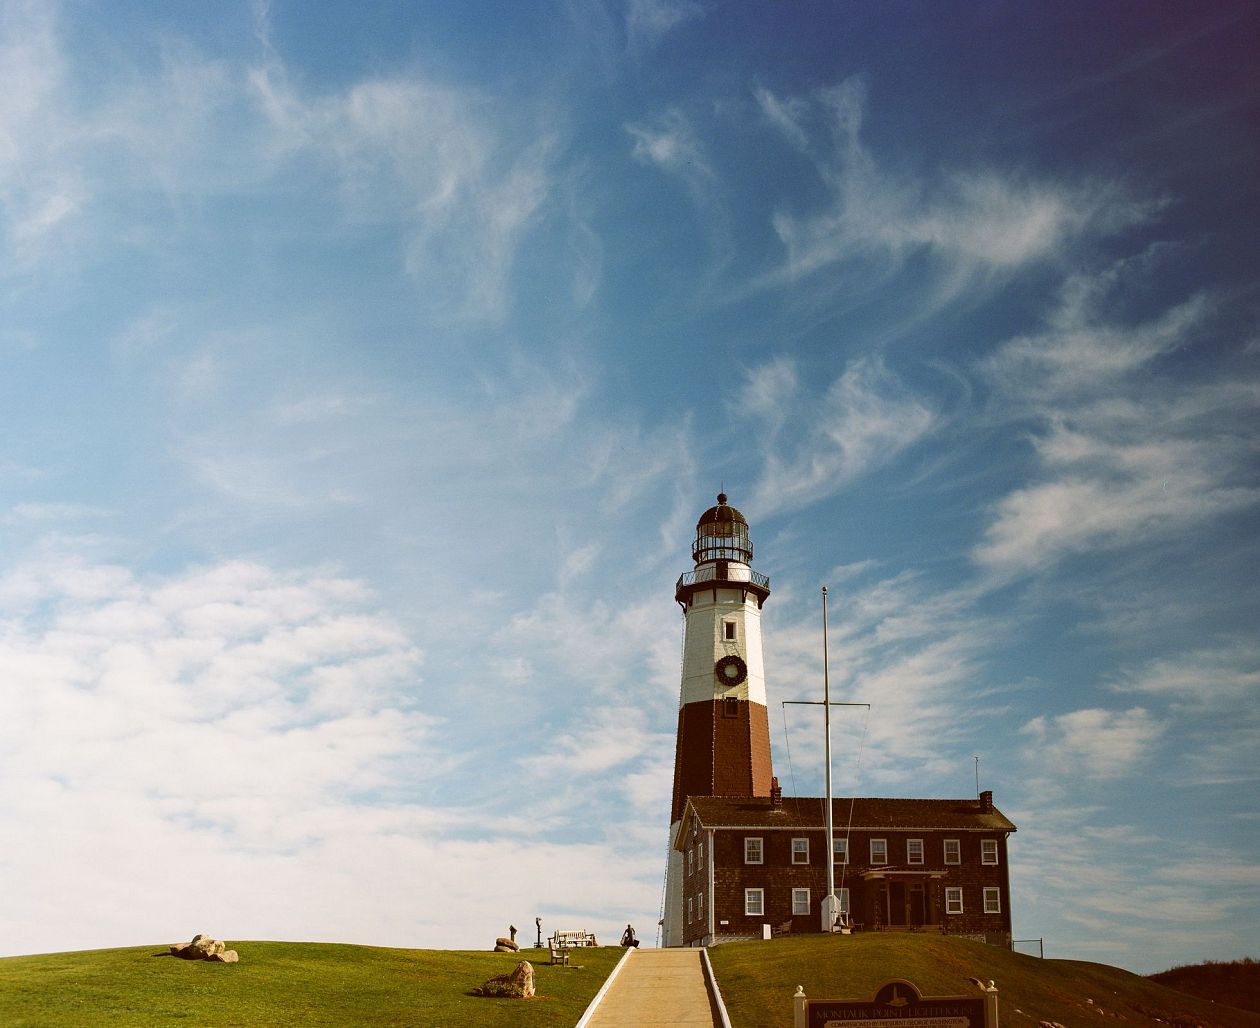 Lighthouse on a hill with blue sky and clouds in the background, Montauk, USA